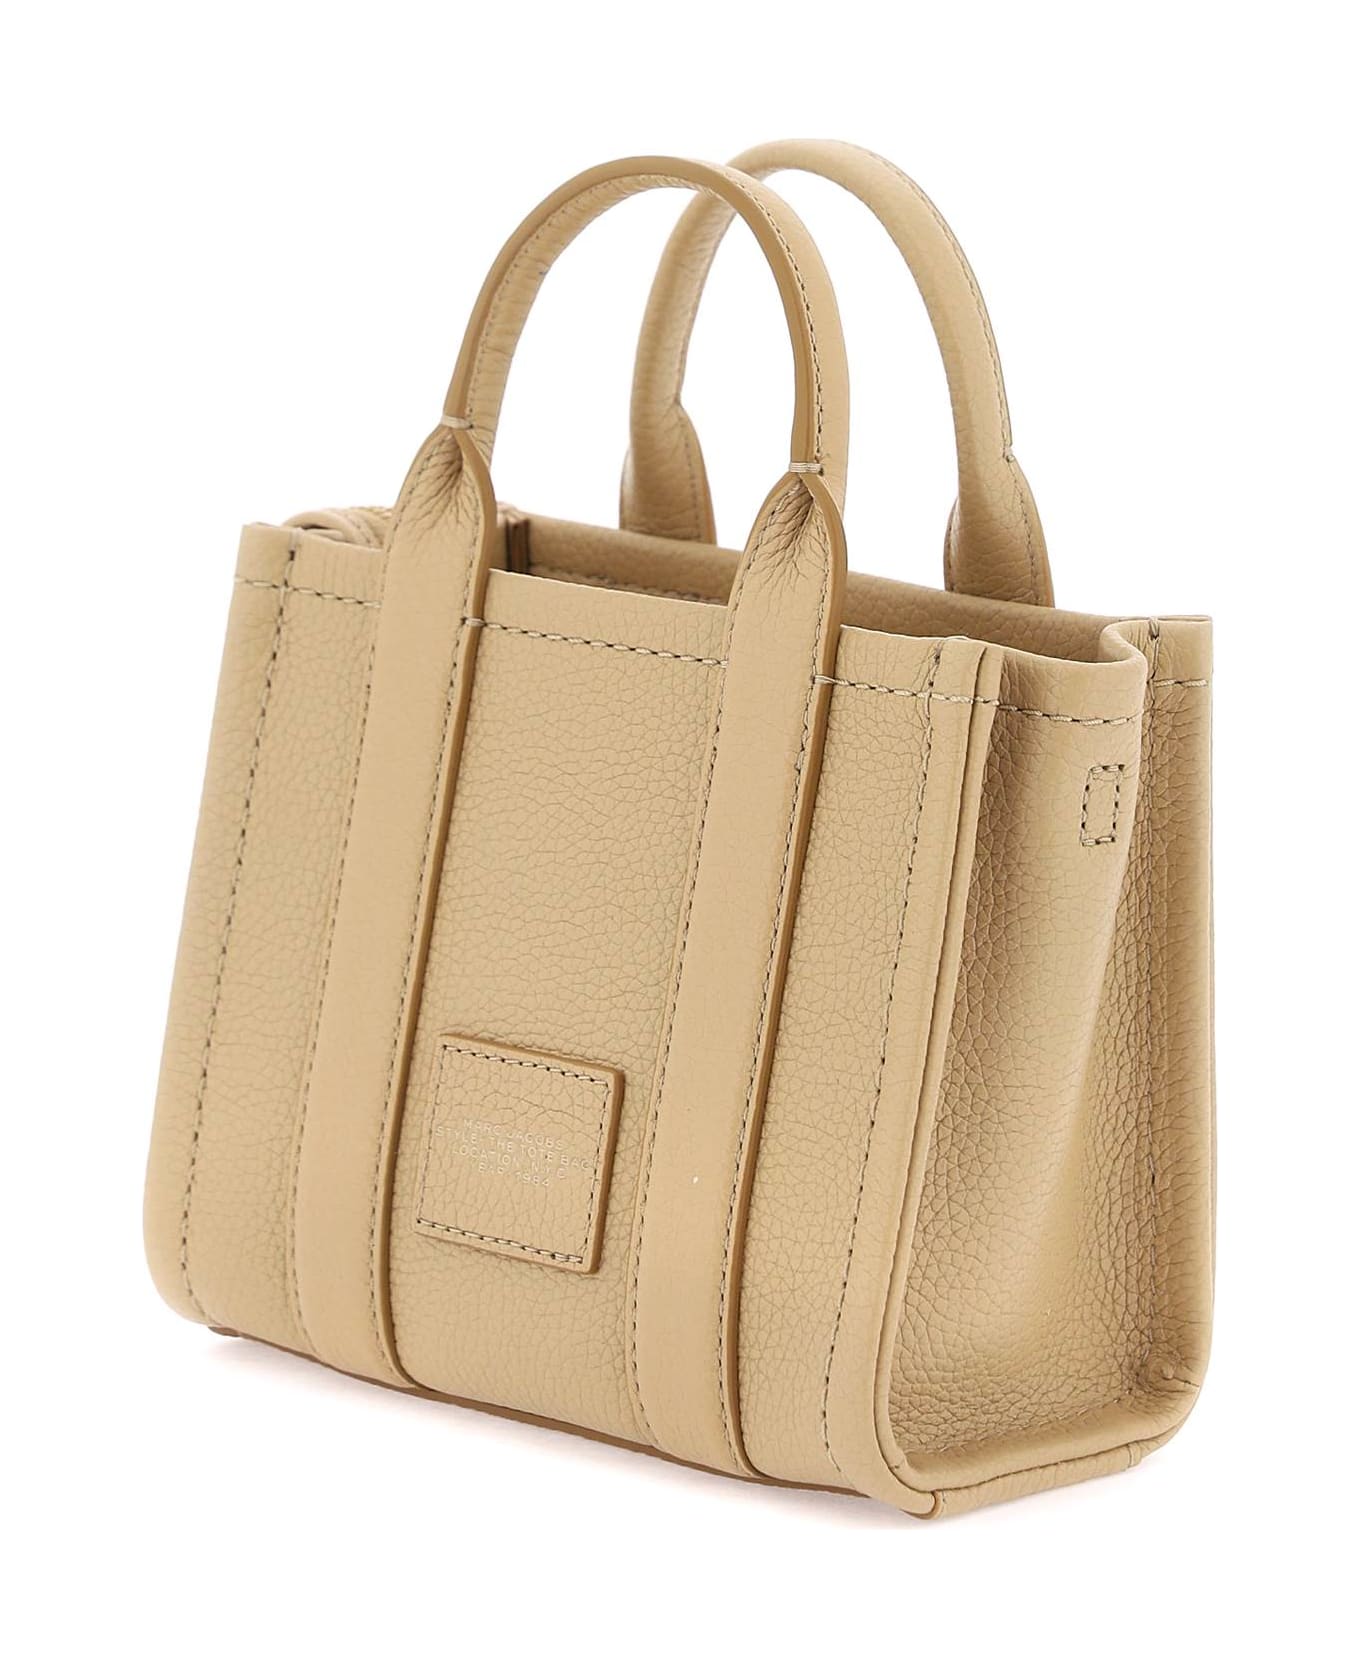 Marc Jacobs The Leather Mini Tote Bag - CAMEL (Beige) トートバッグ